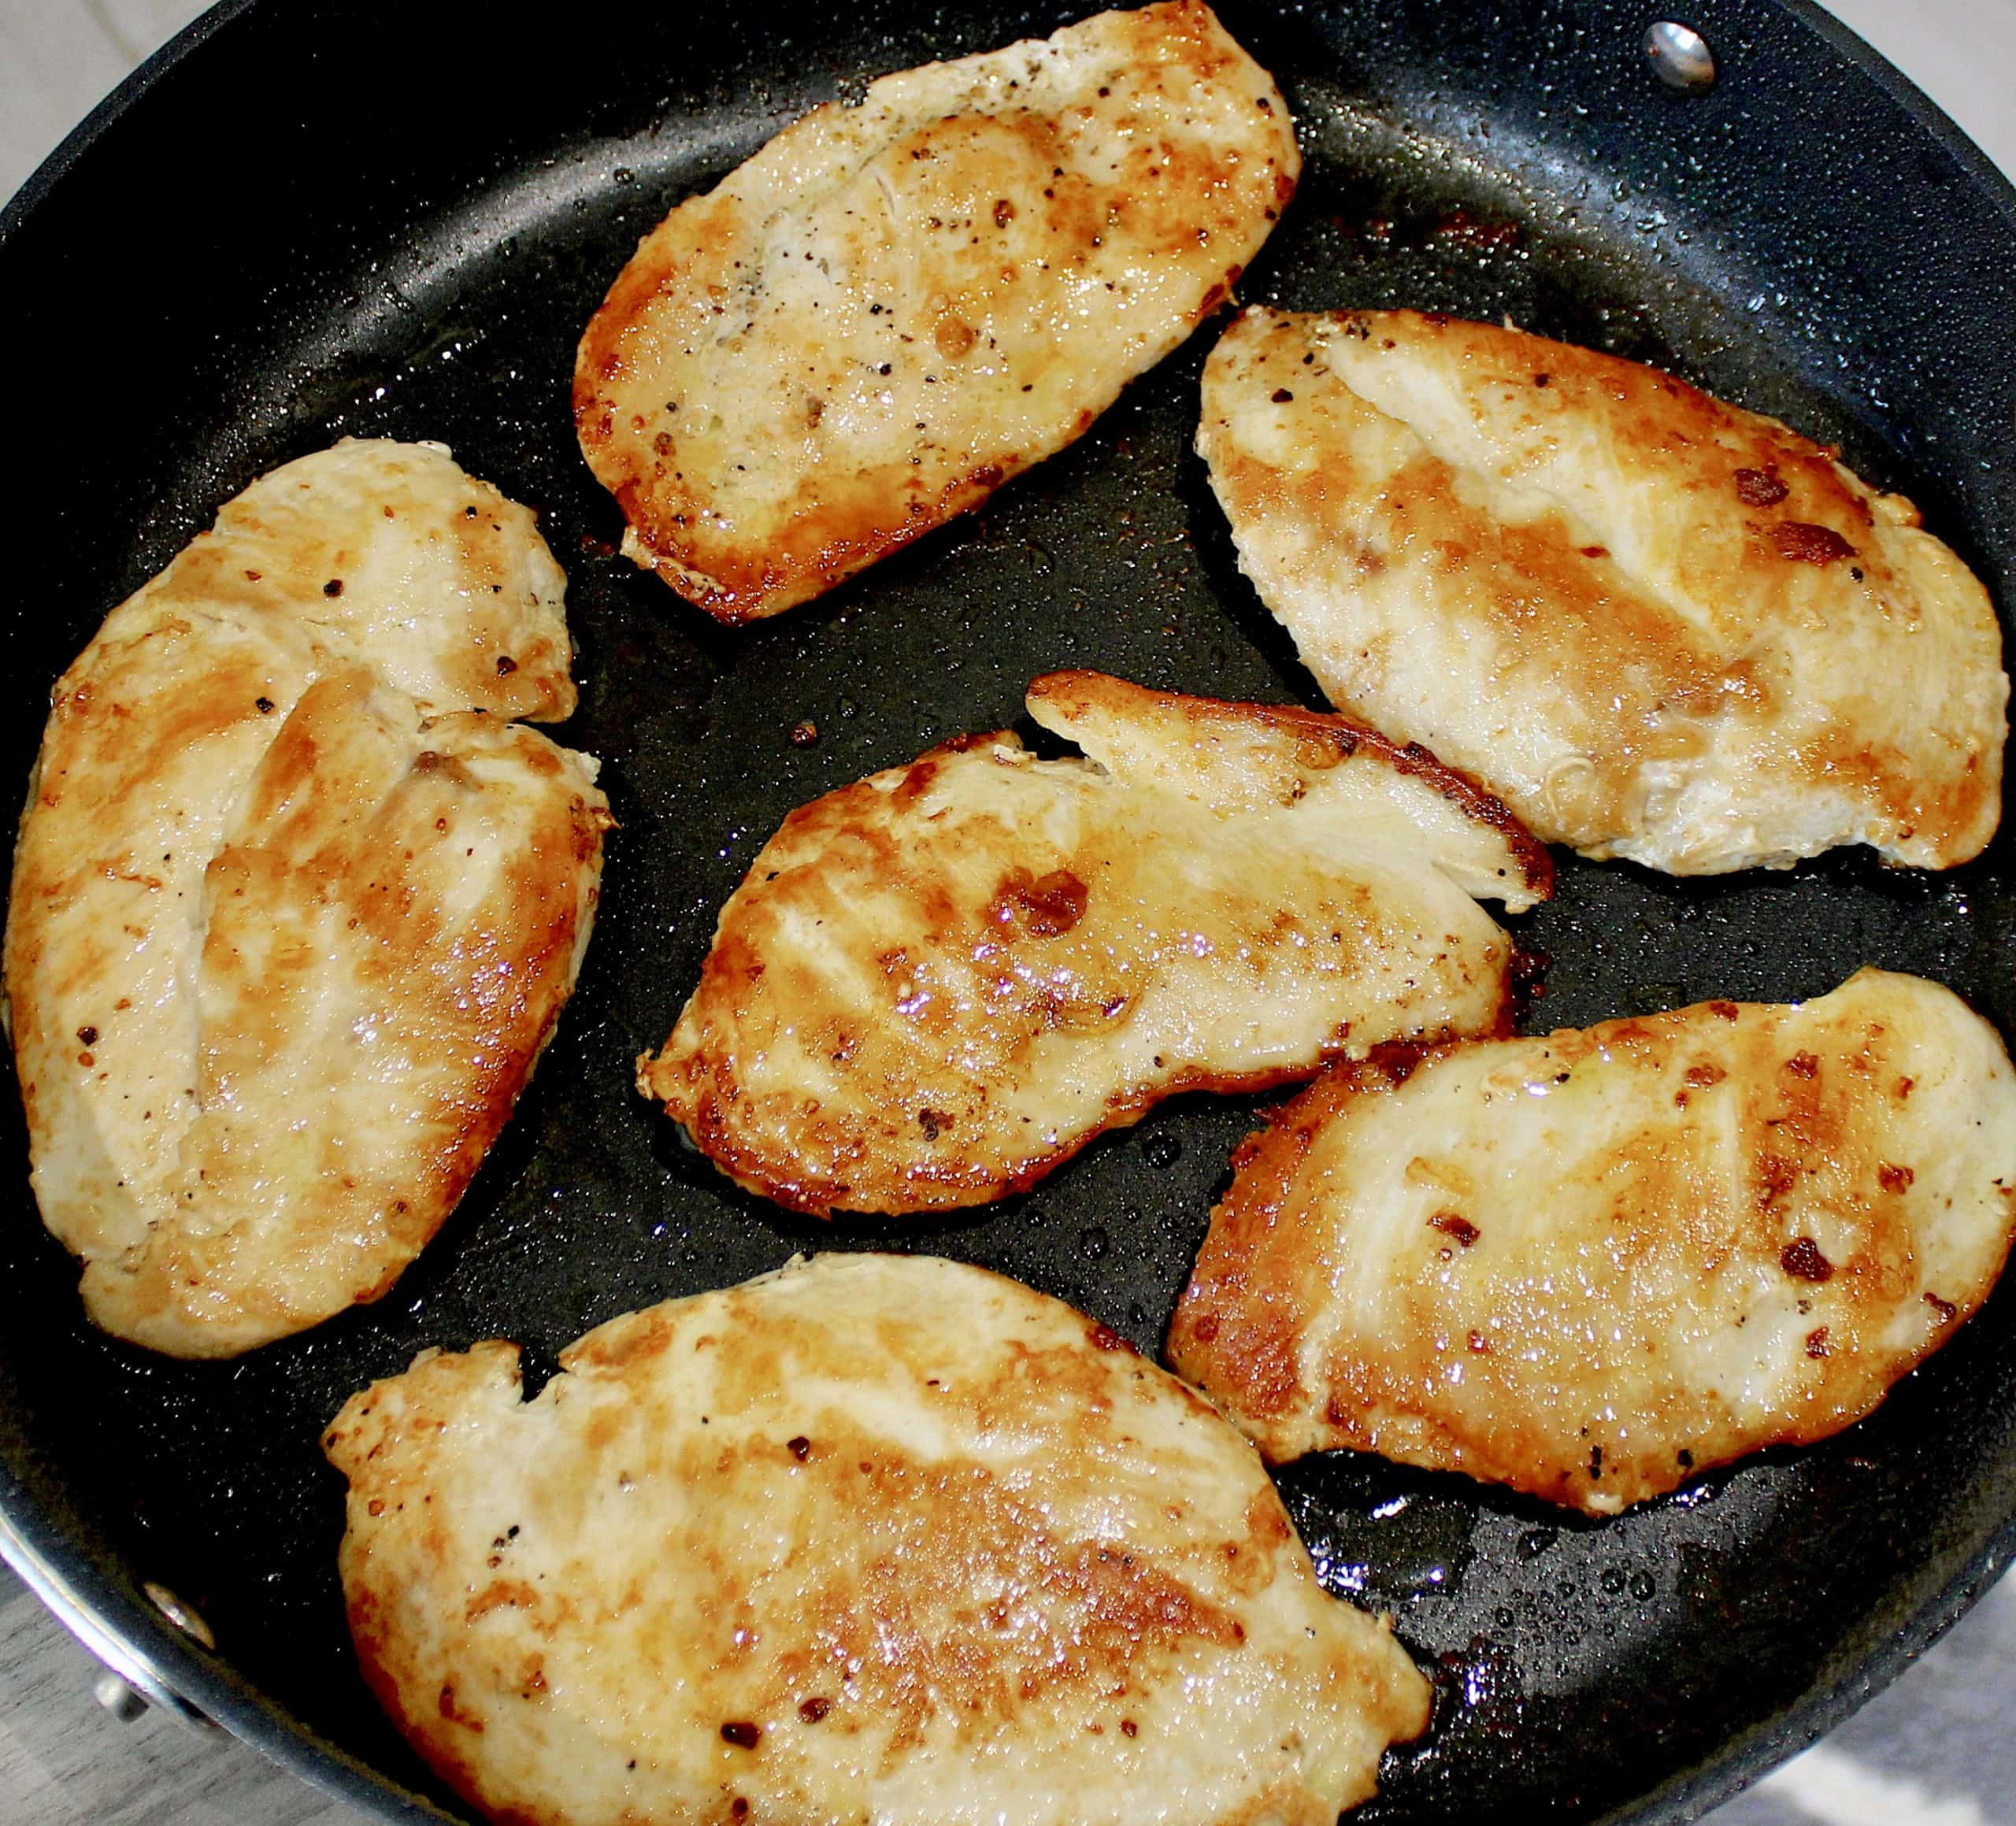 6 cooked chicken breasts in skillet